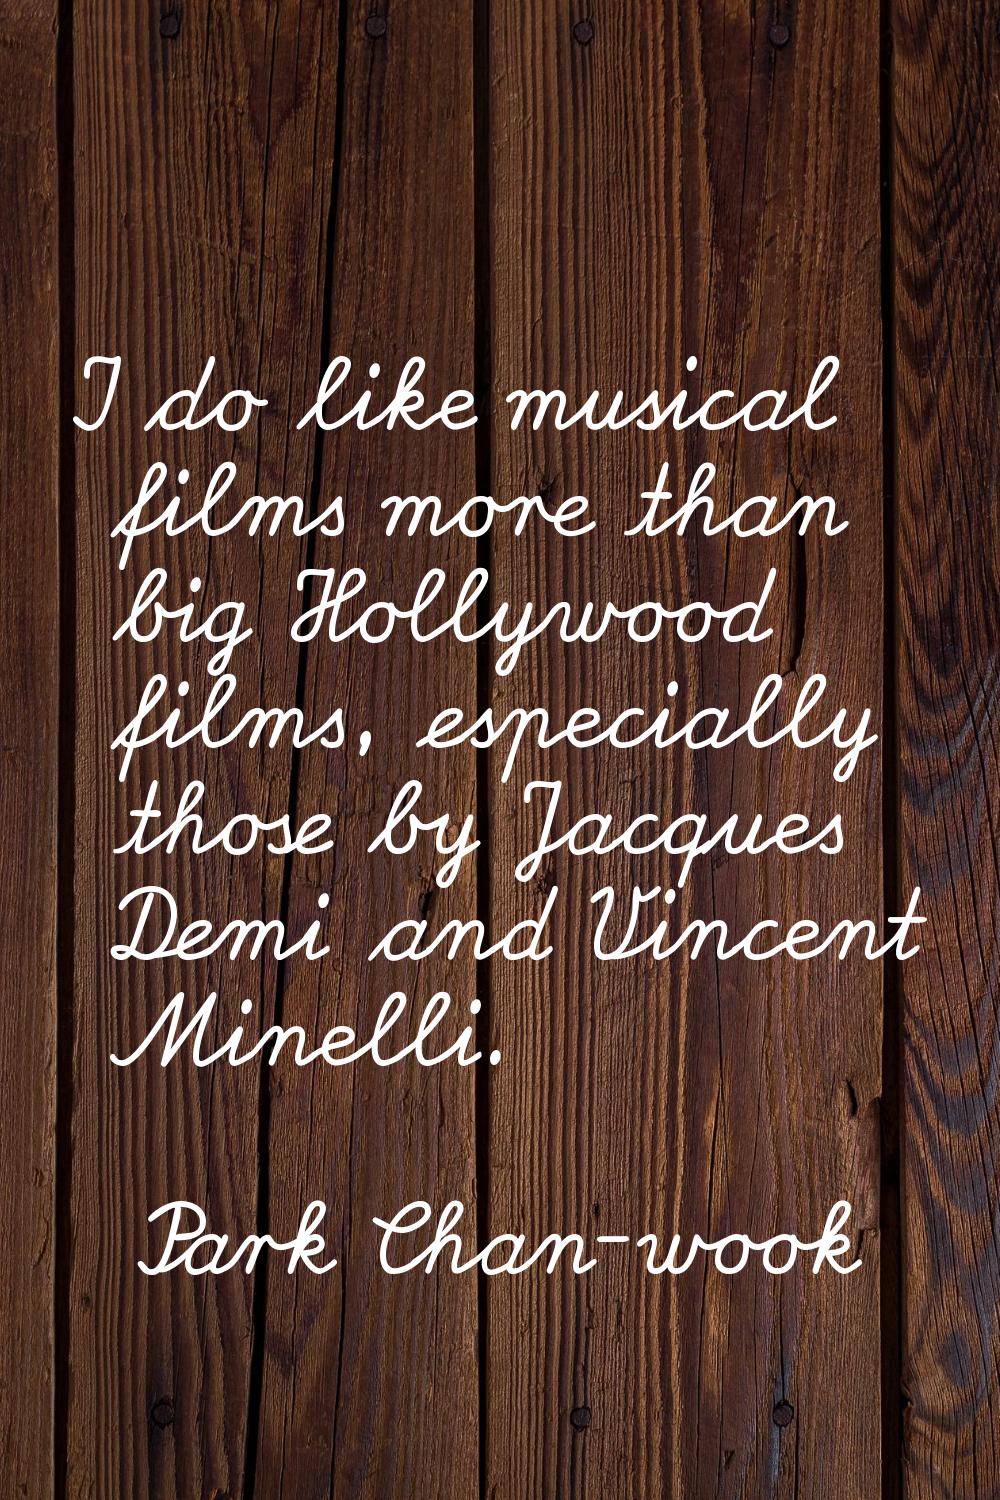 I do like musical films more than big Hollywood films, especially those by Jacques Demi and Vincent